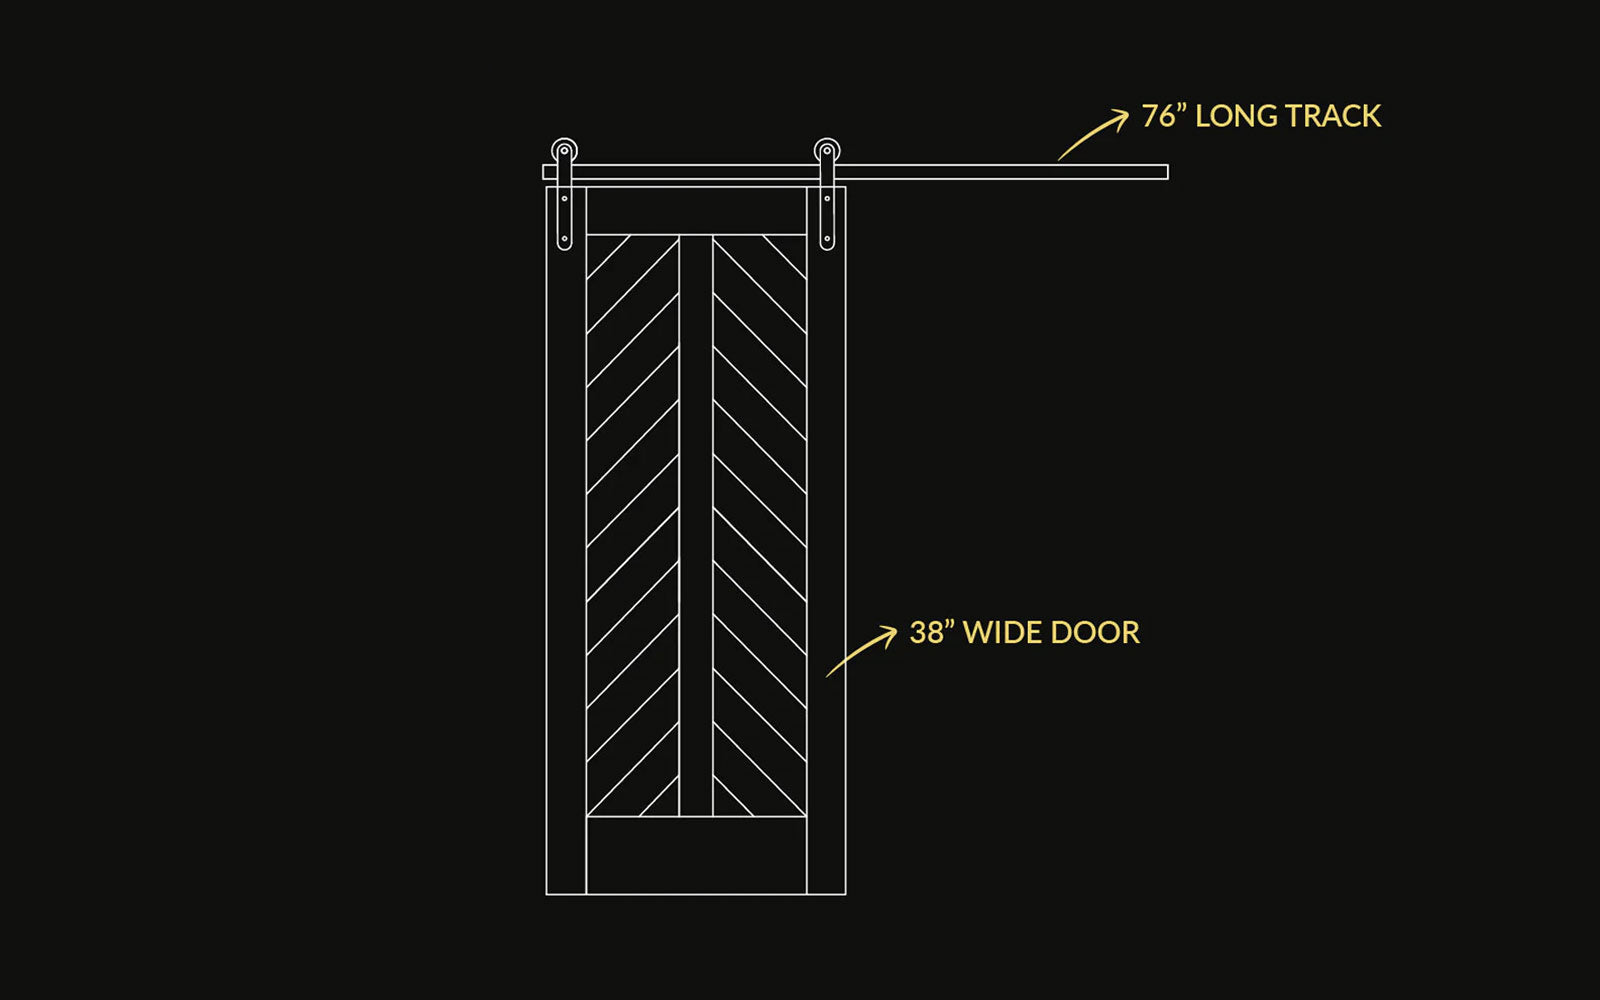 lined drawing of barn door with dimensions